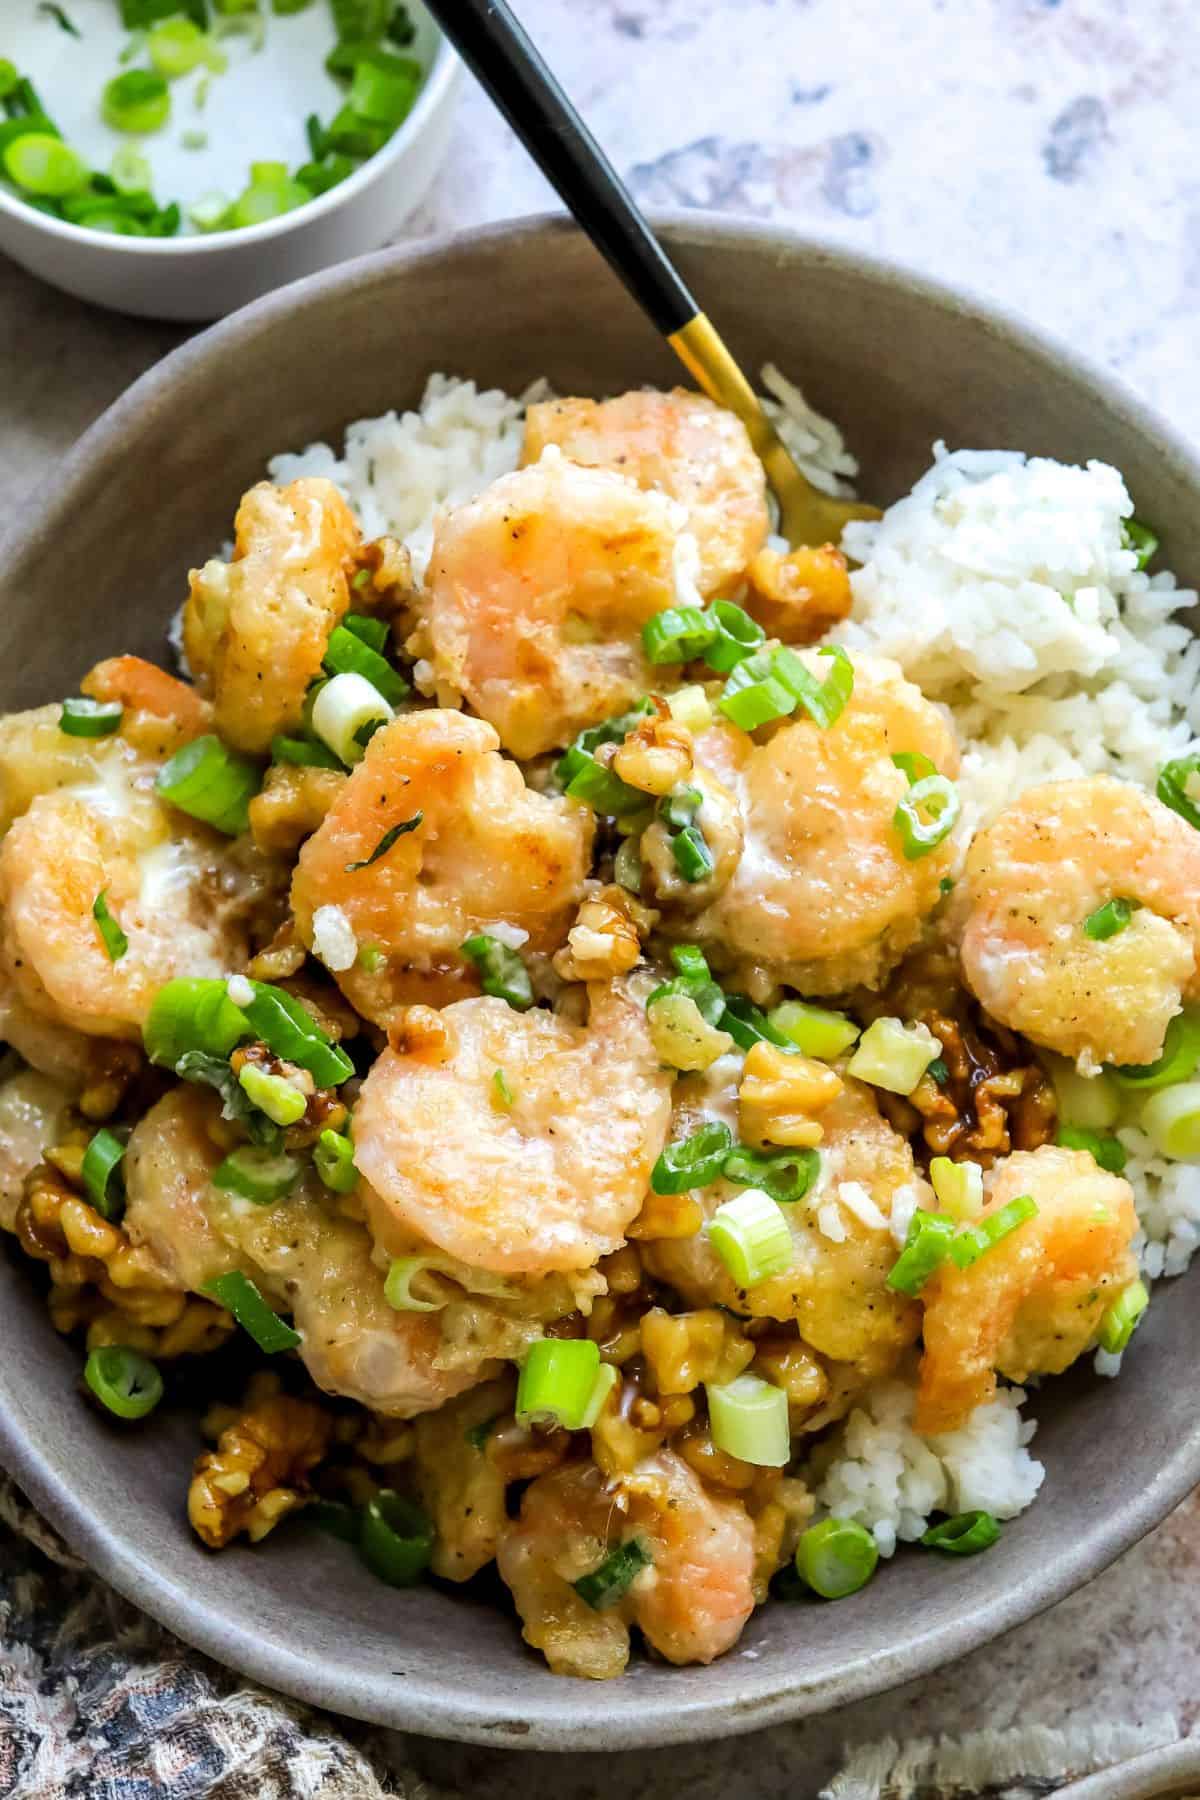 A close up image of honey walnut shrimp in a bowl over rice, garnished with green onions and candied walnuts.